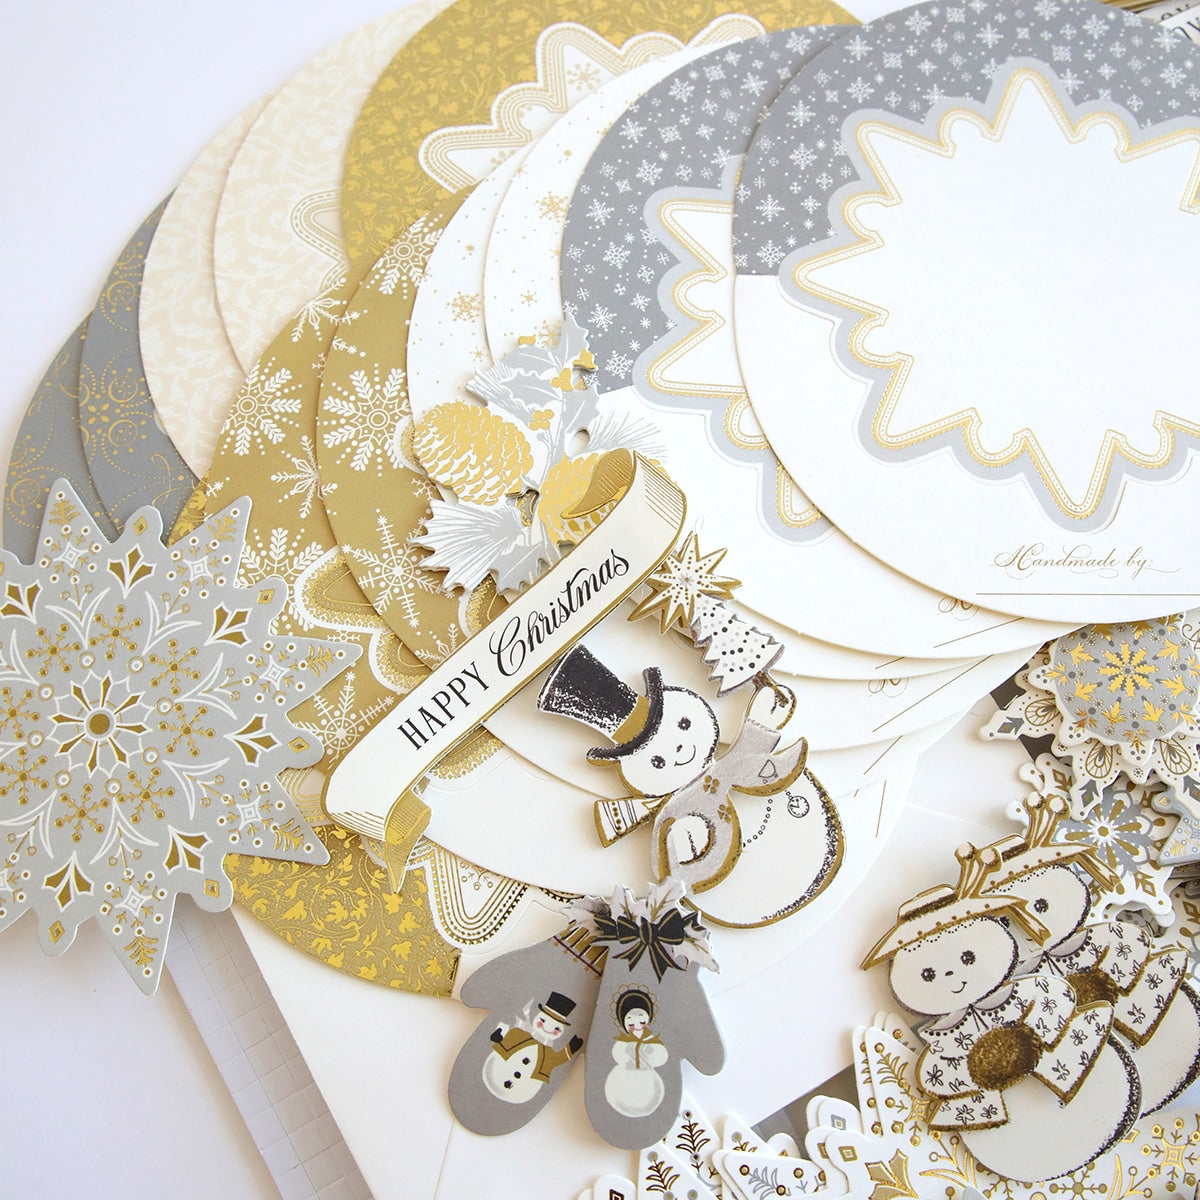 A collection of Simply Rocking Snowflake Card Kit with snowflakes and snowflakes.